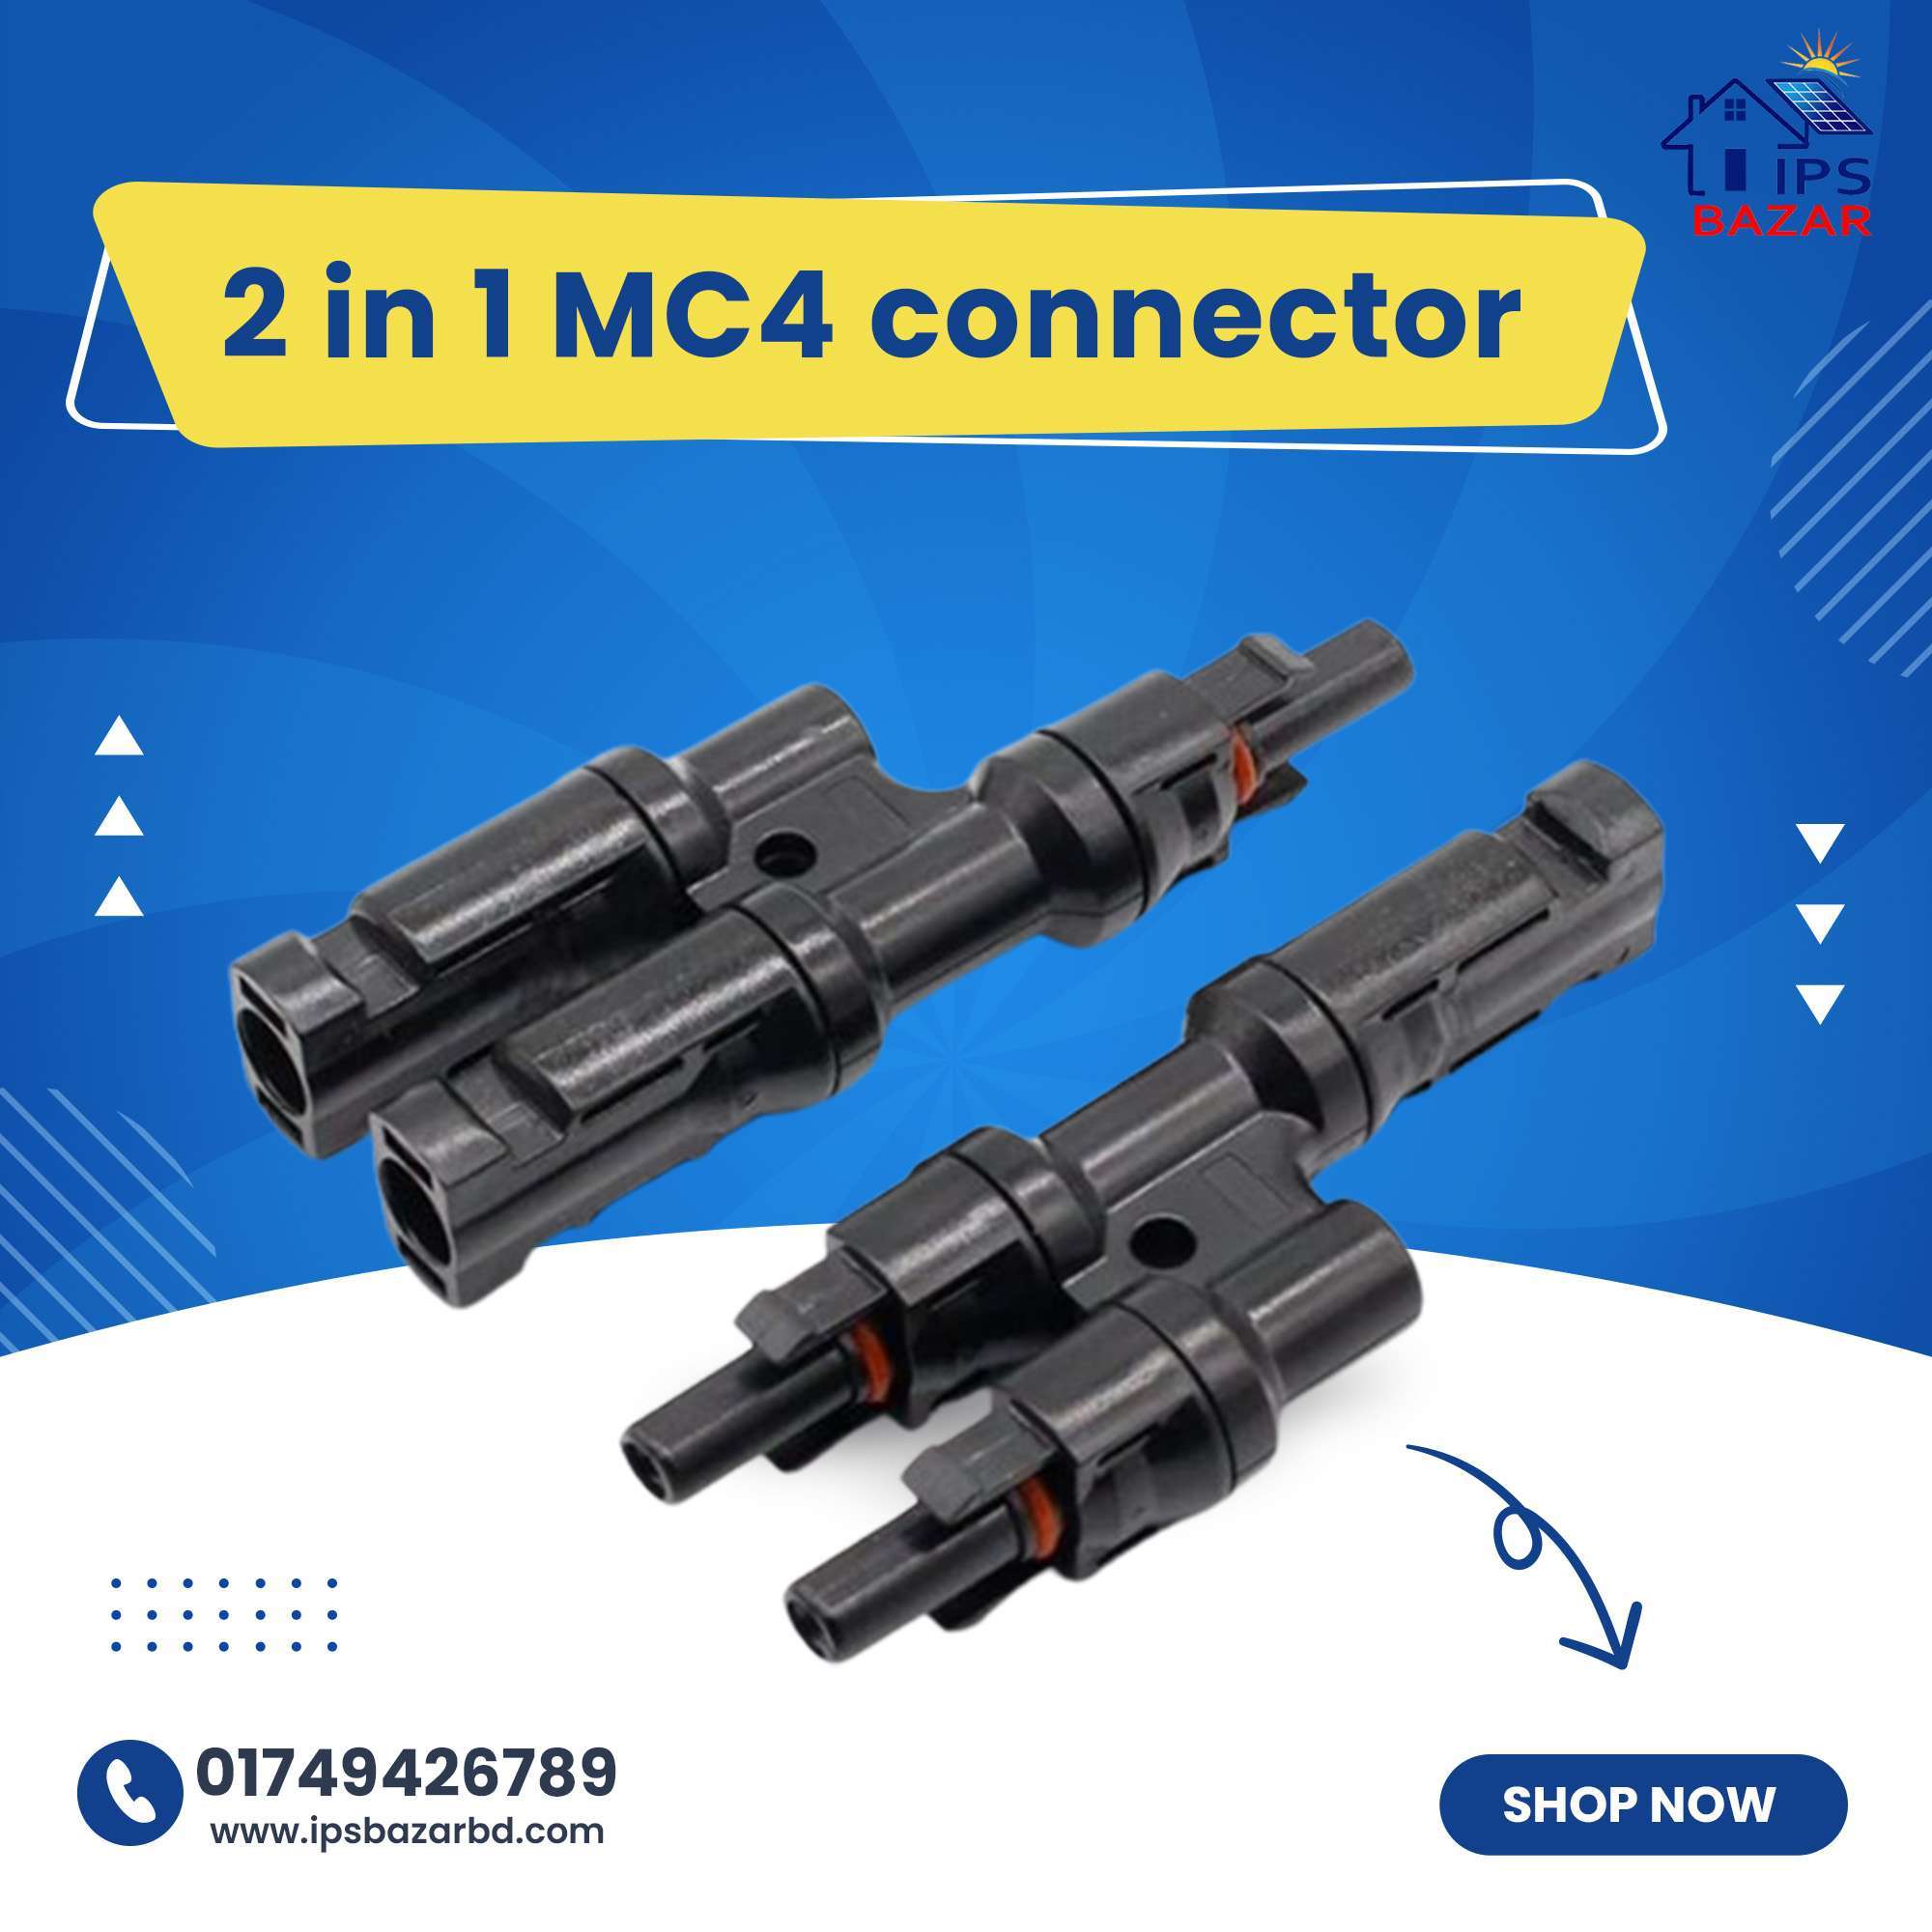 2 IN 1 MC4 Connector